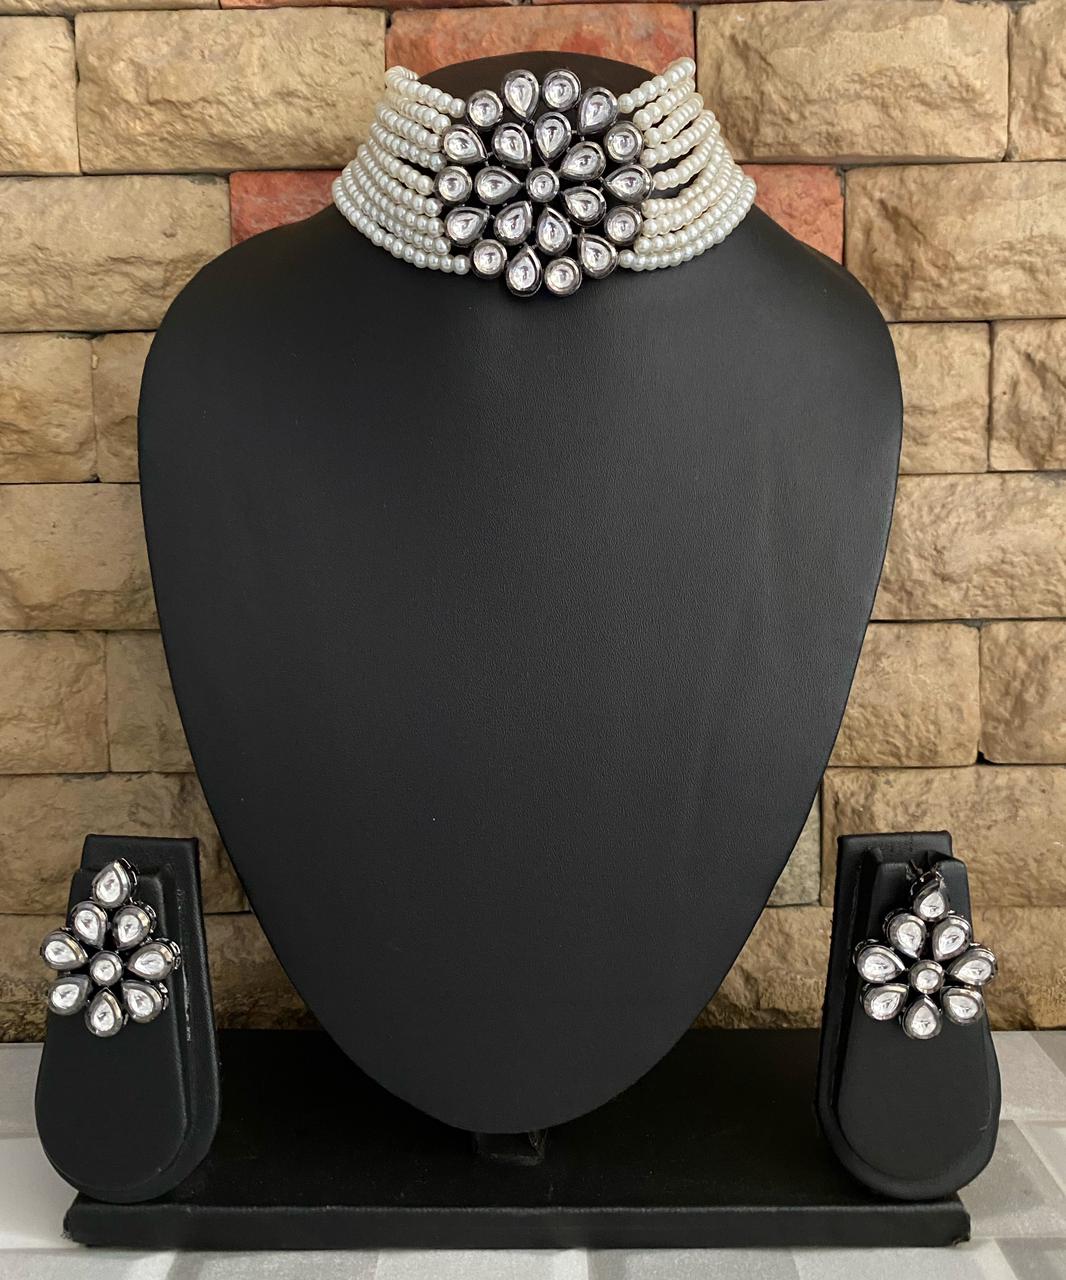 Oxidised Kundan With Pearls Choker Necklace Set Handcrafted For Ladies Choker Necklace Set